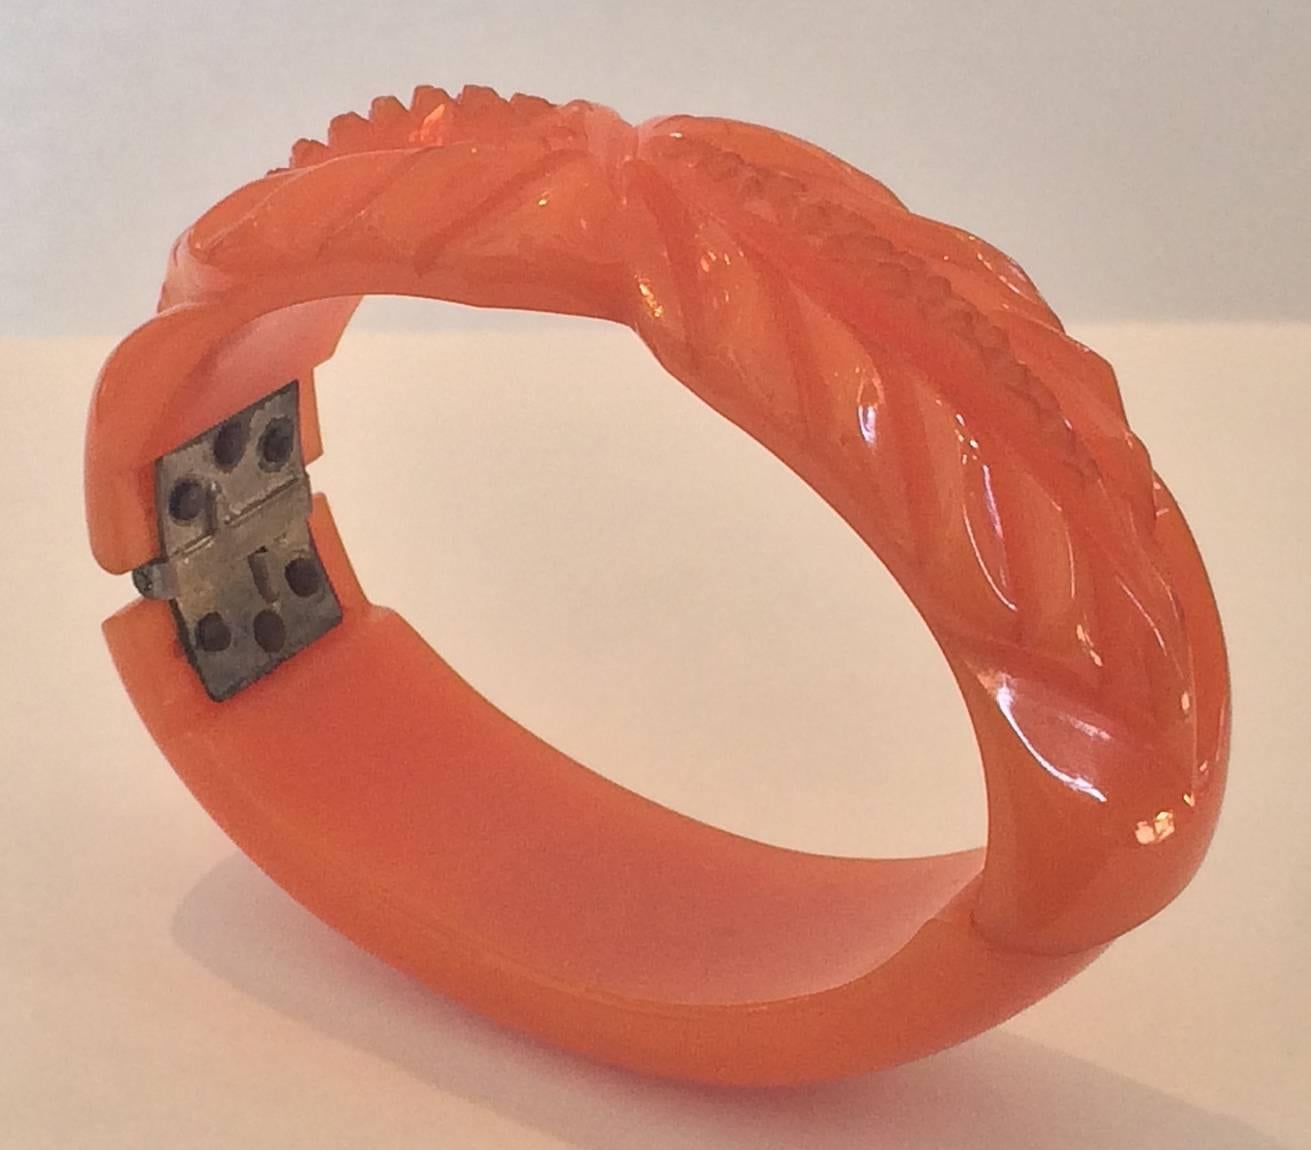 Outstanding Art Deco Bangle, Clamper style in Tangerine/light Orange with flower/leaf carving. All excellent with original hinge working perfectly. No damage or repairs. Dimensions approx..: 60mm x 44mm oval opening, 12mm wide band x up to 9mm